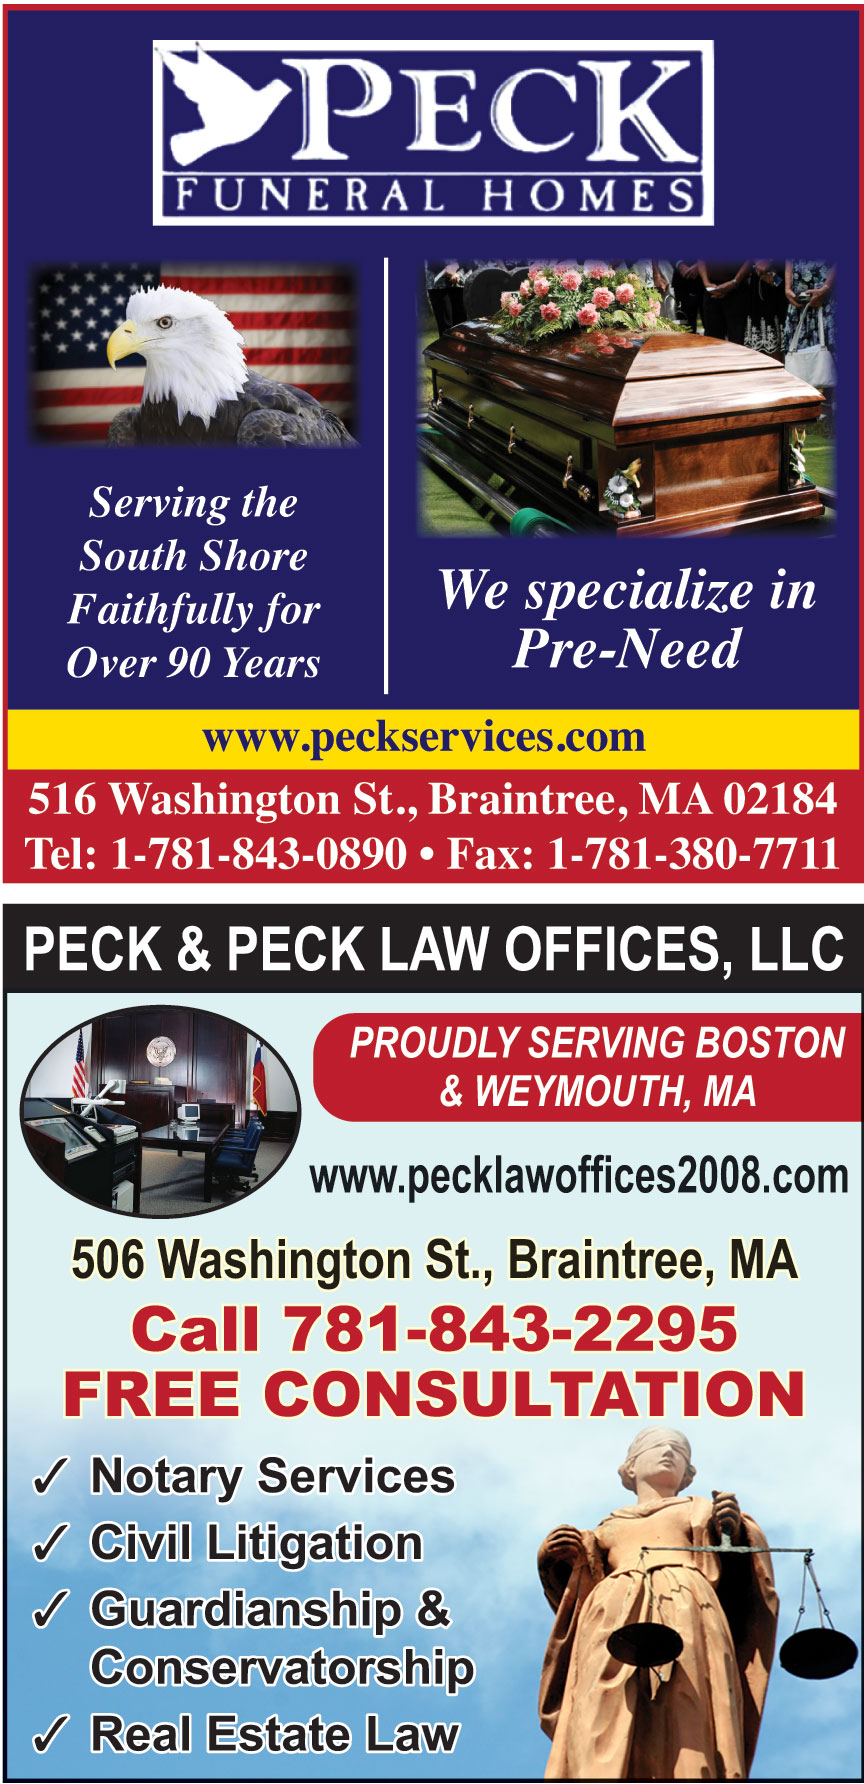 PECK FUNERAL HOMES